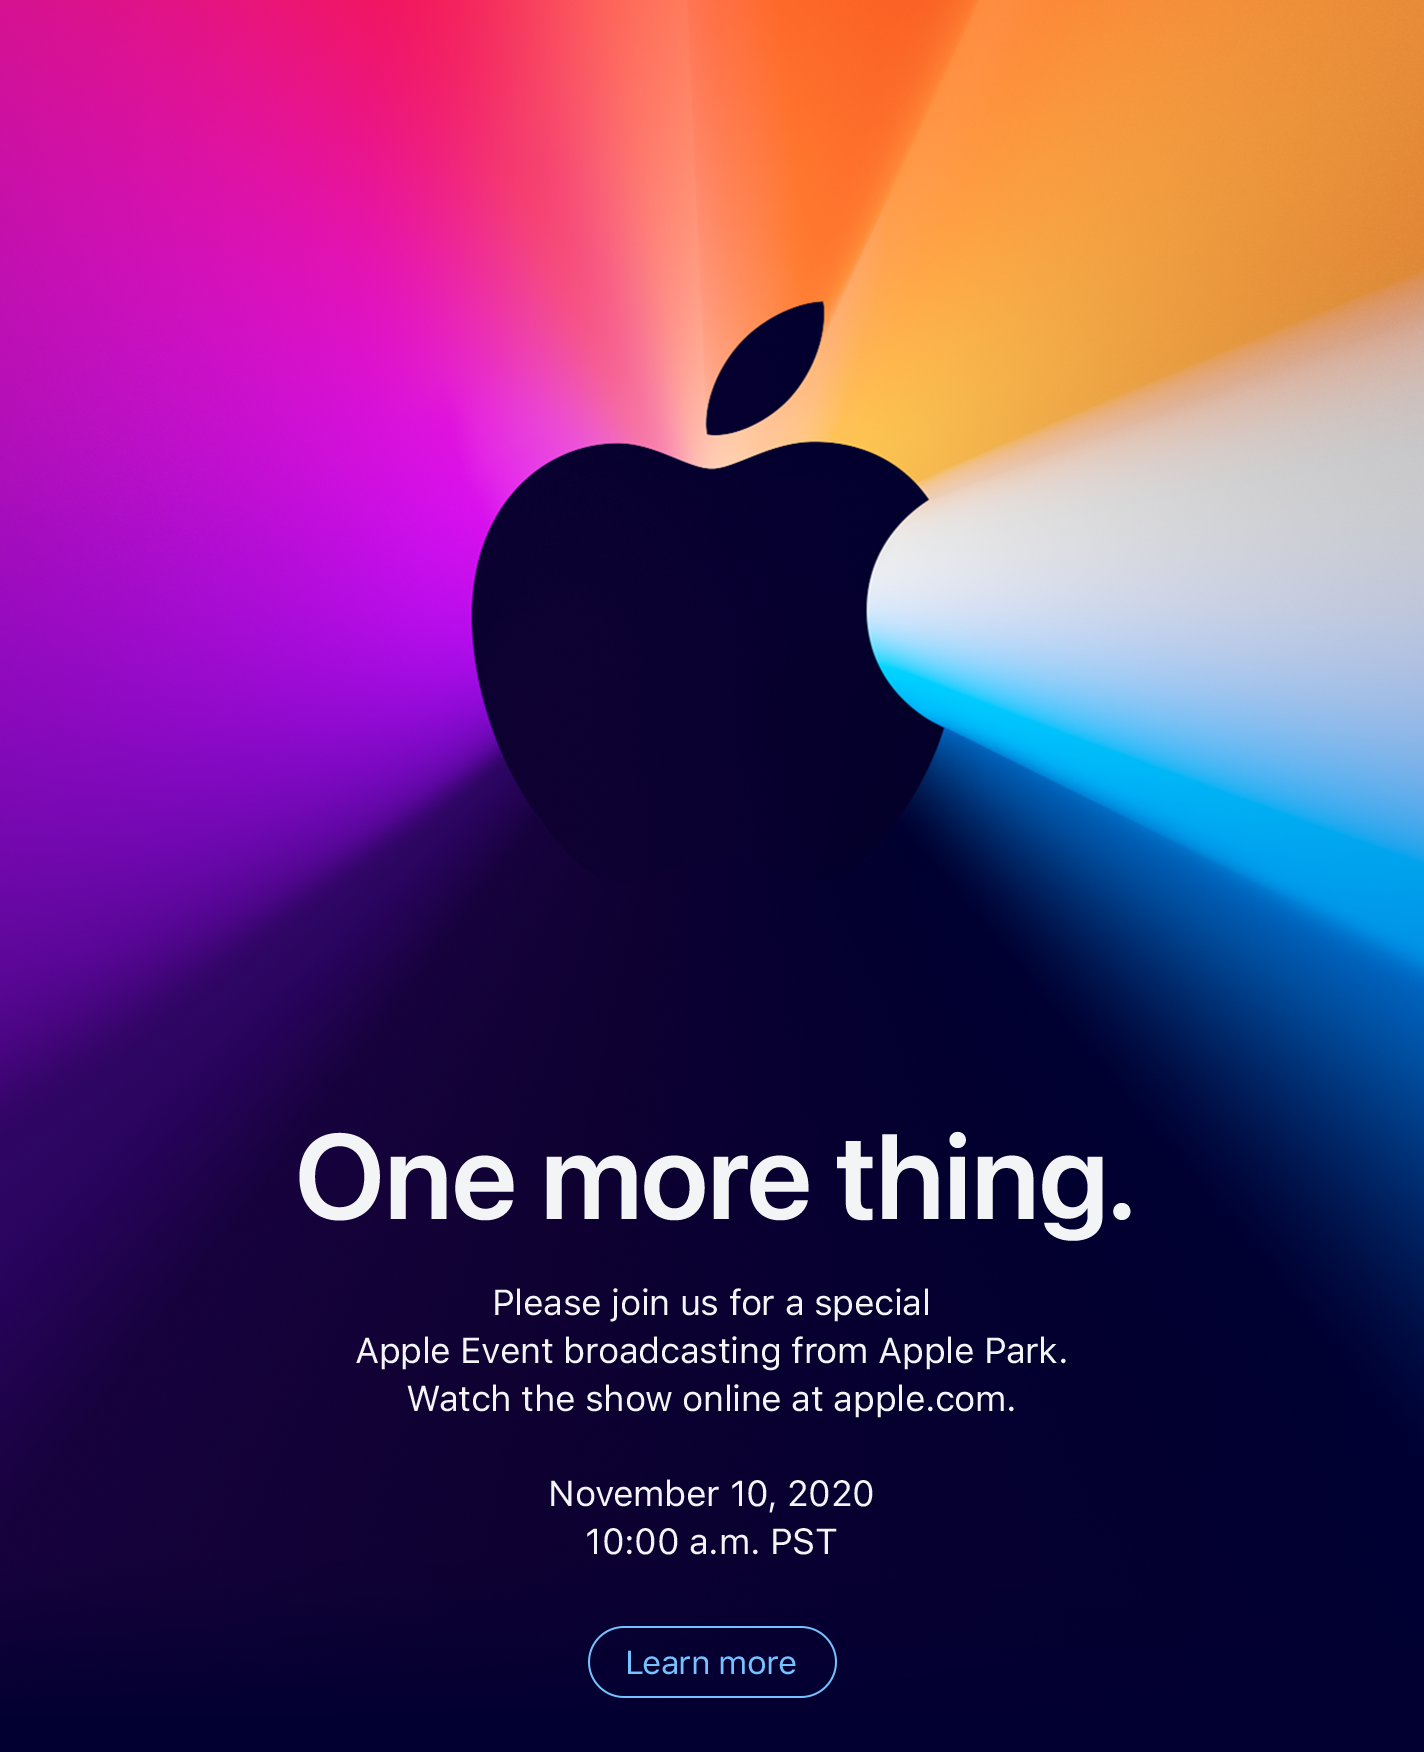 One more thing.  Please join us for a special Apple Event broadcasting from Apple Park. Watch the show online at apple.com.  November 10, 2020 10:00 a.m. PST. Learn more